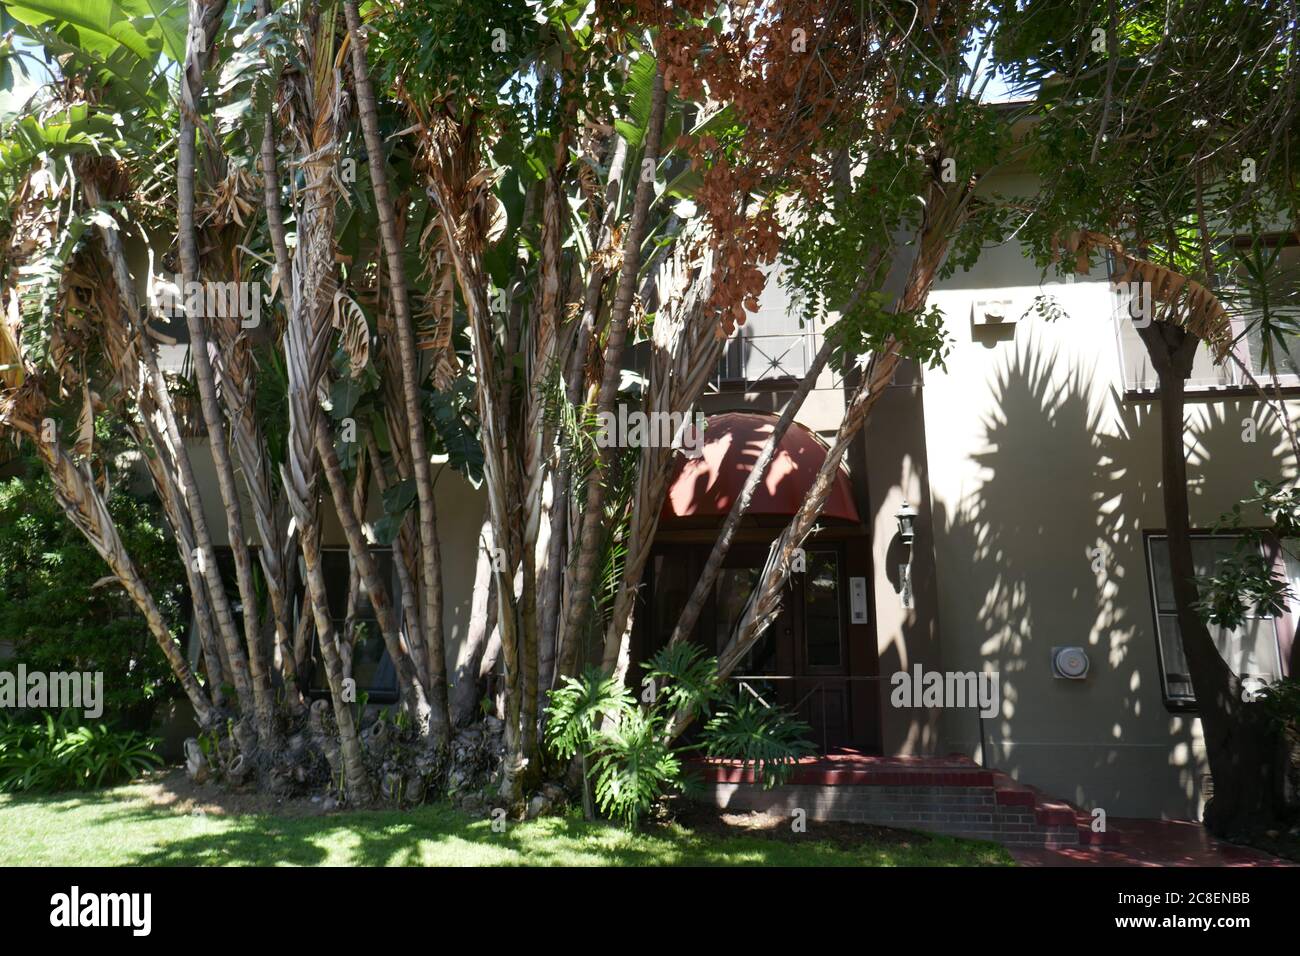 Los Angeles, California, USA 23rd July 2020 A general view of atmosphere of British Model Ronald Anthony Margau, aka Ron Marquette's apartment where he committed suicide (September 27, 1994) in front of girlfriend Dee Dee Pfeiffer at 1438 N. Gardner Street, on July 23, 2020 in Los Angeles, California, USA. Photo by Barry King/Alamy Stock Photo Stock Photo